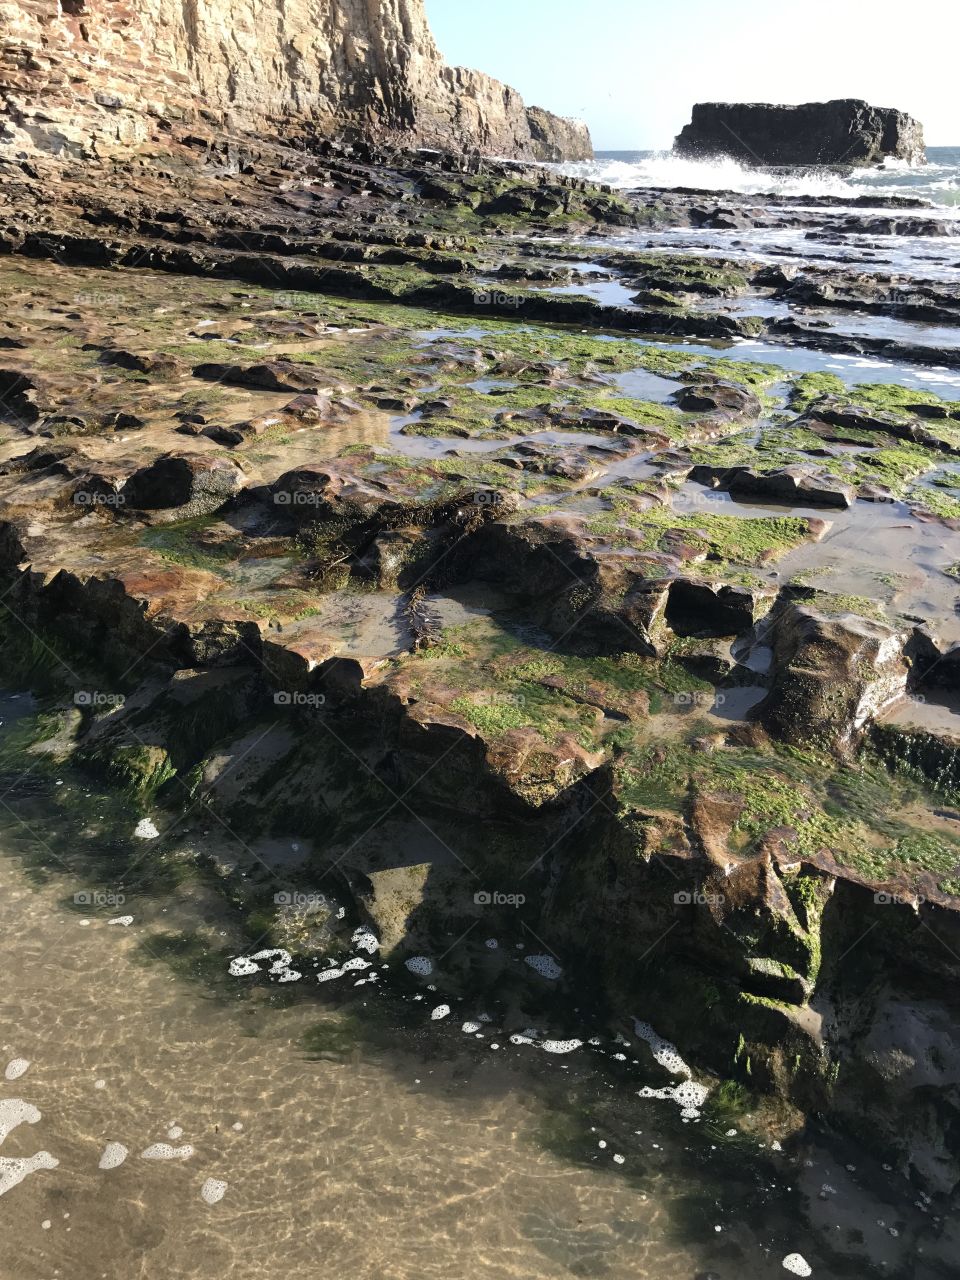 The mossy rocks like steps from the roaring ocean down to the sandy beach. The waves crash in and trickle down into a shallow pool on the shoreline. 